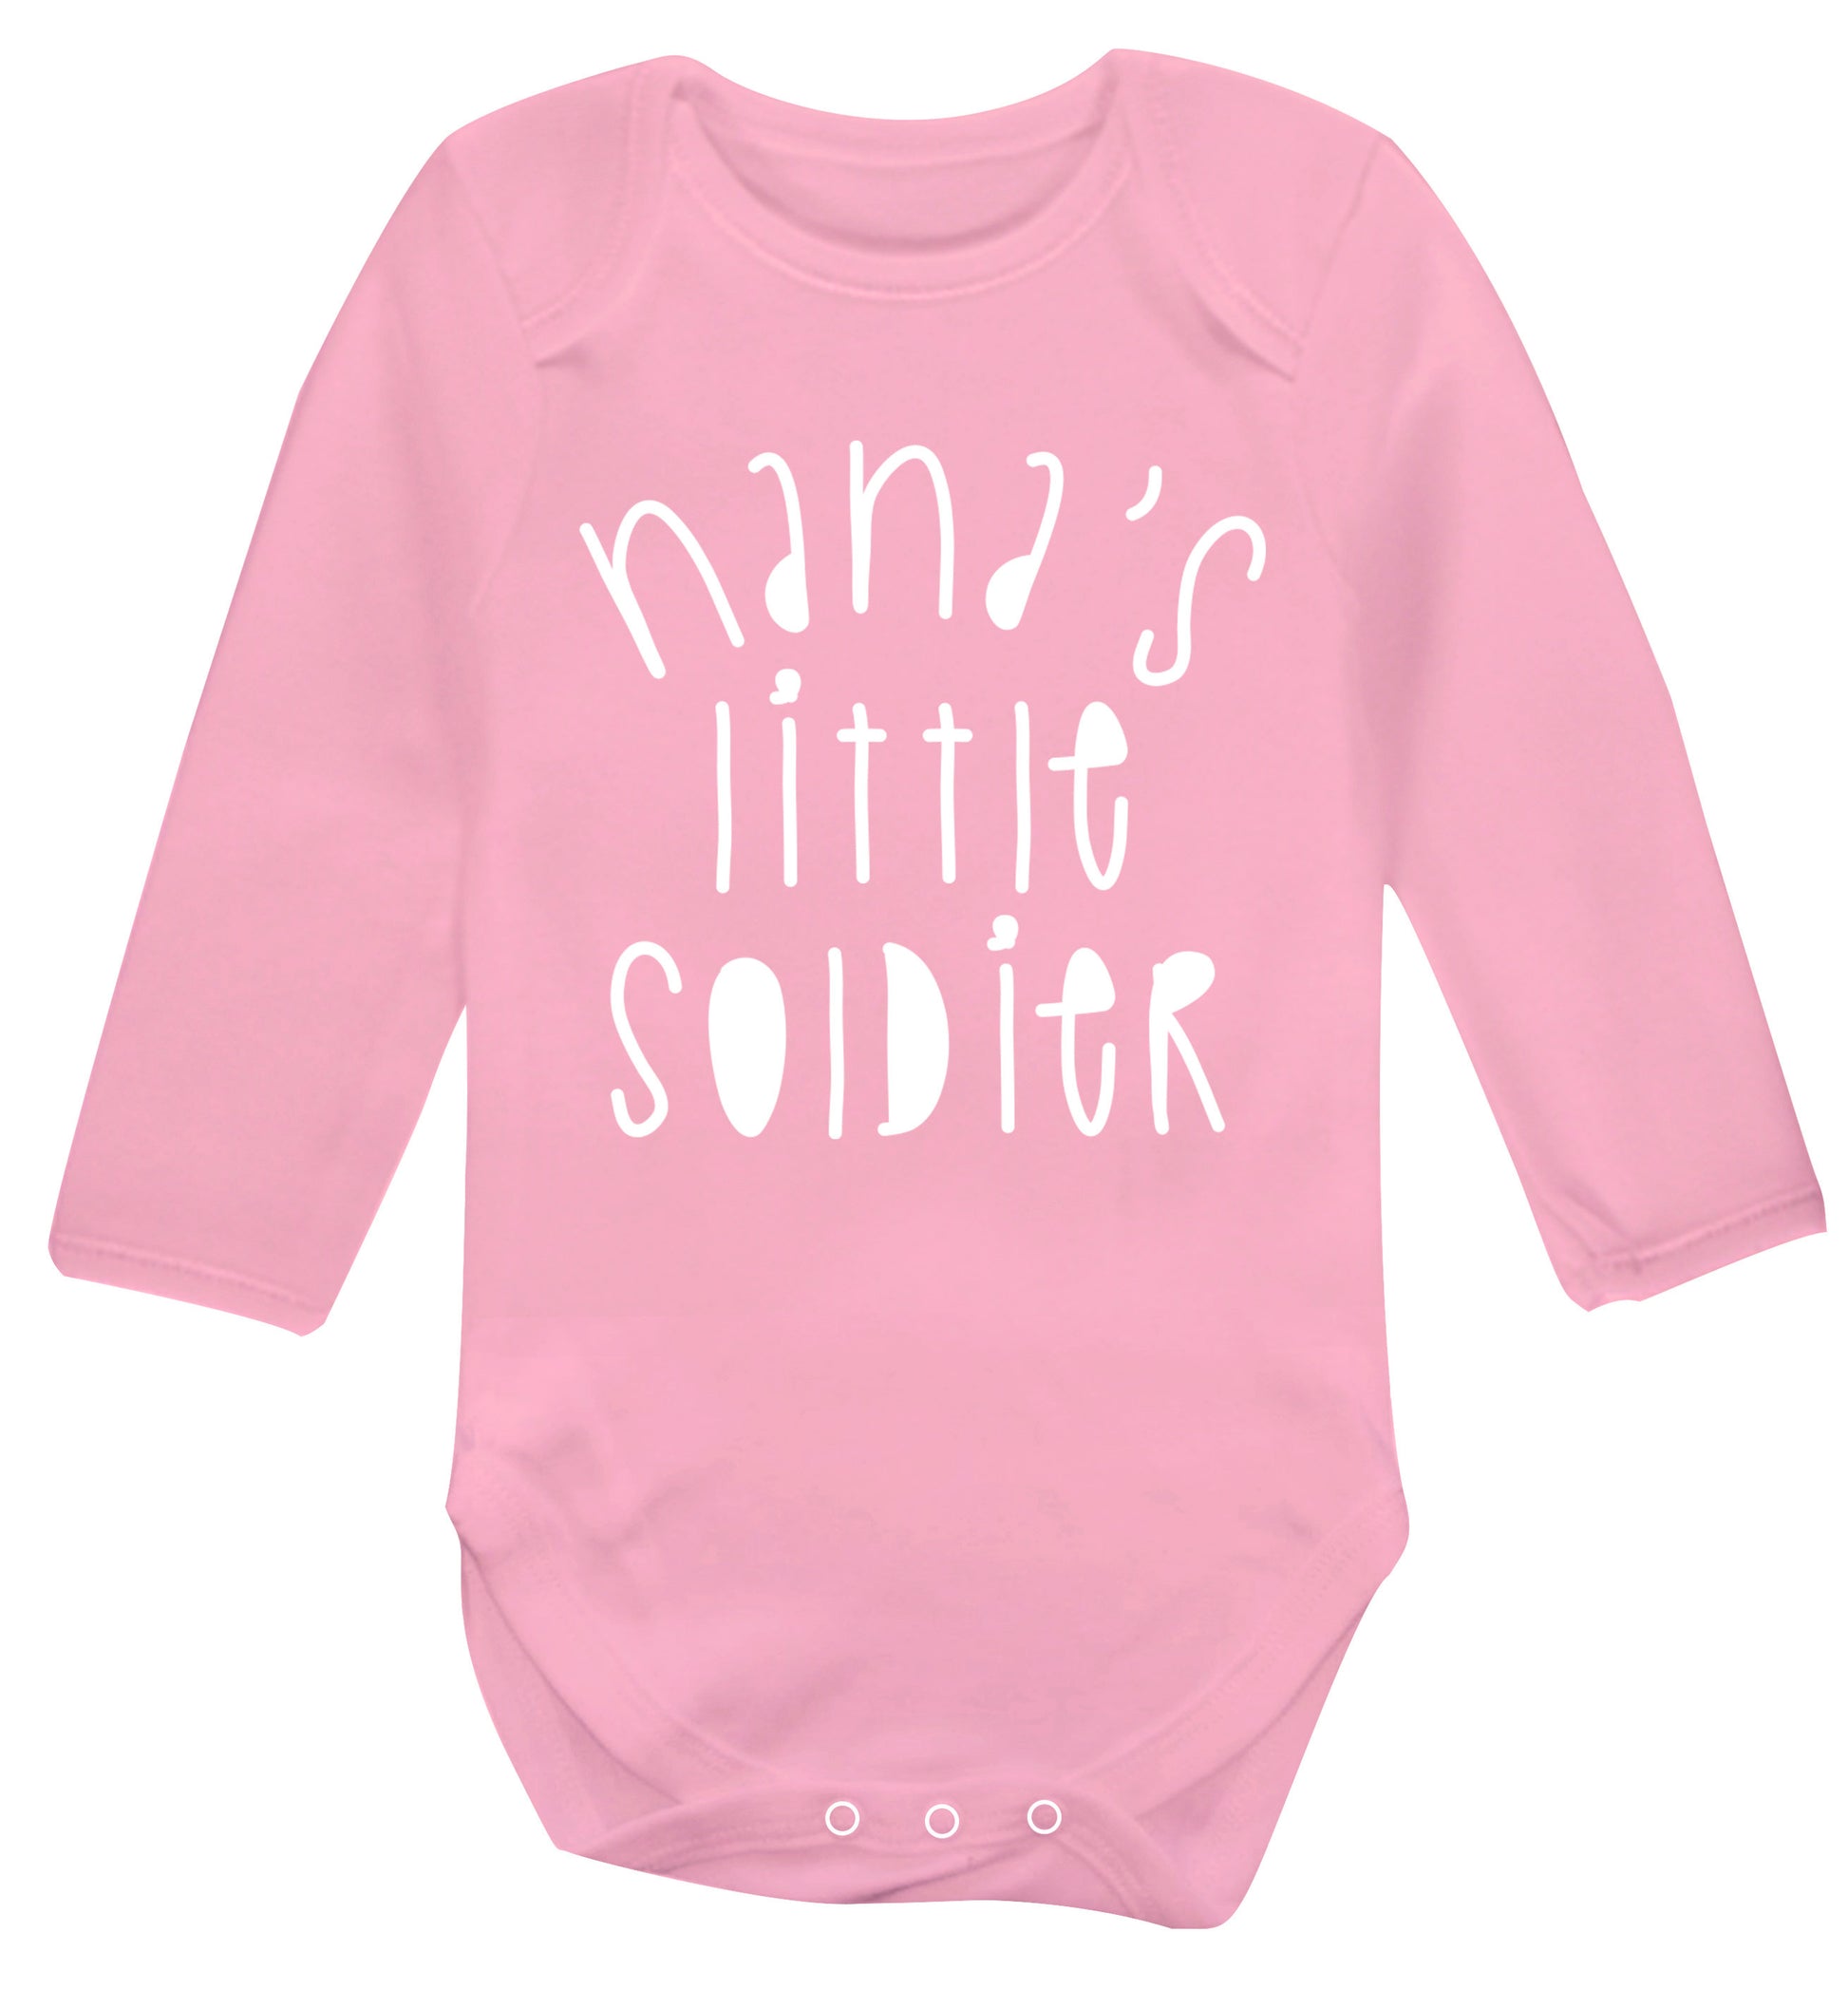 Nana's little soldier Baby Vest long sleeved pale pink 6-12 months